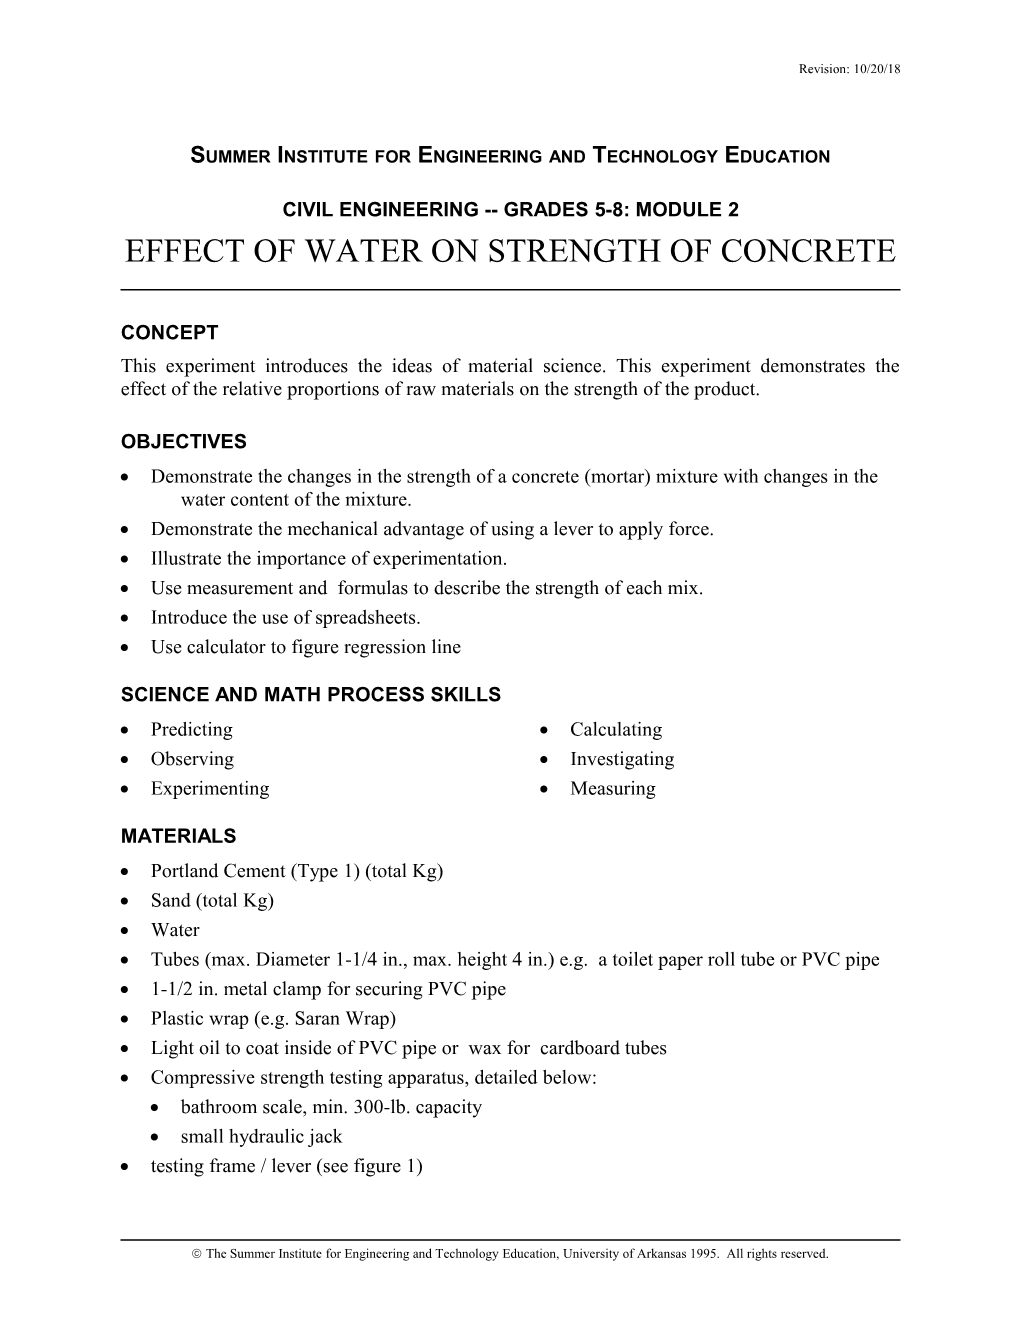 Effect of Water on Strength of Concrete